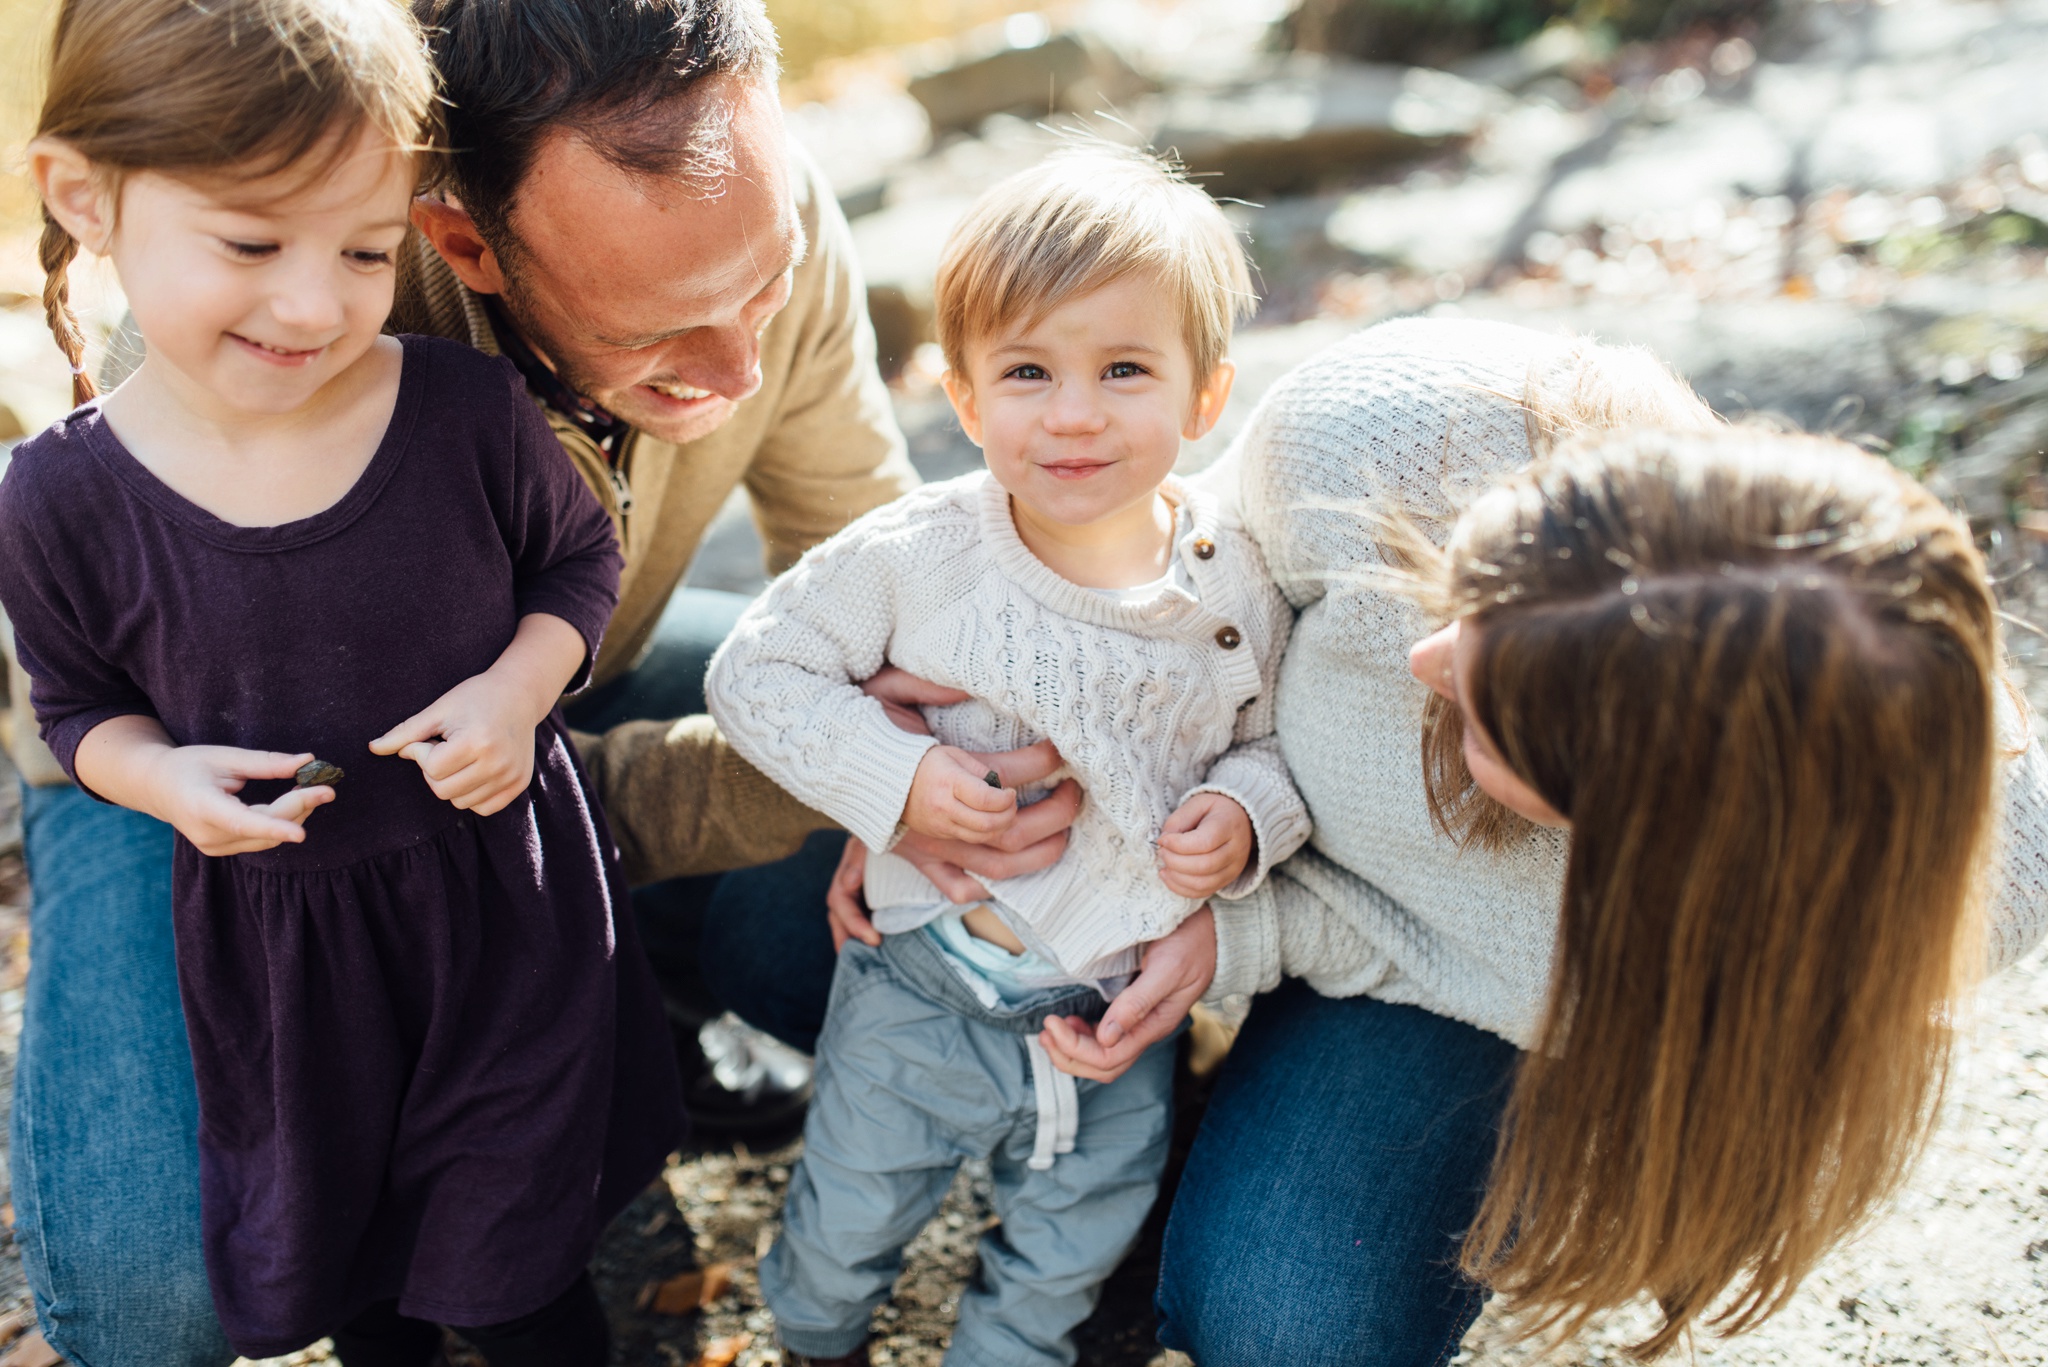 Wissahickon Valley Park Family Session - Alison Dunn Photography photo